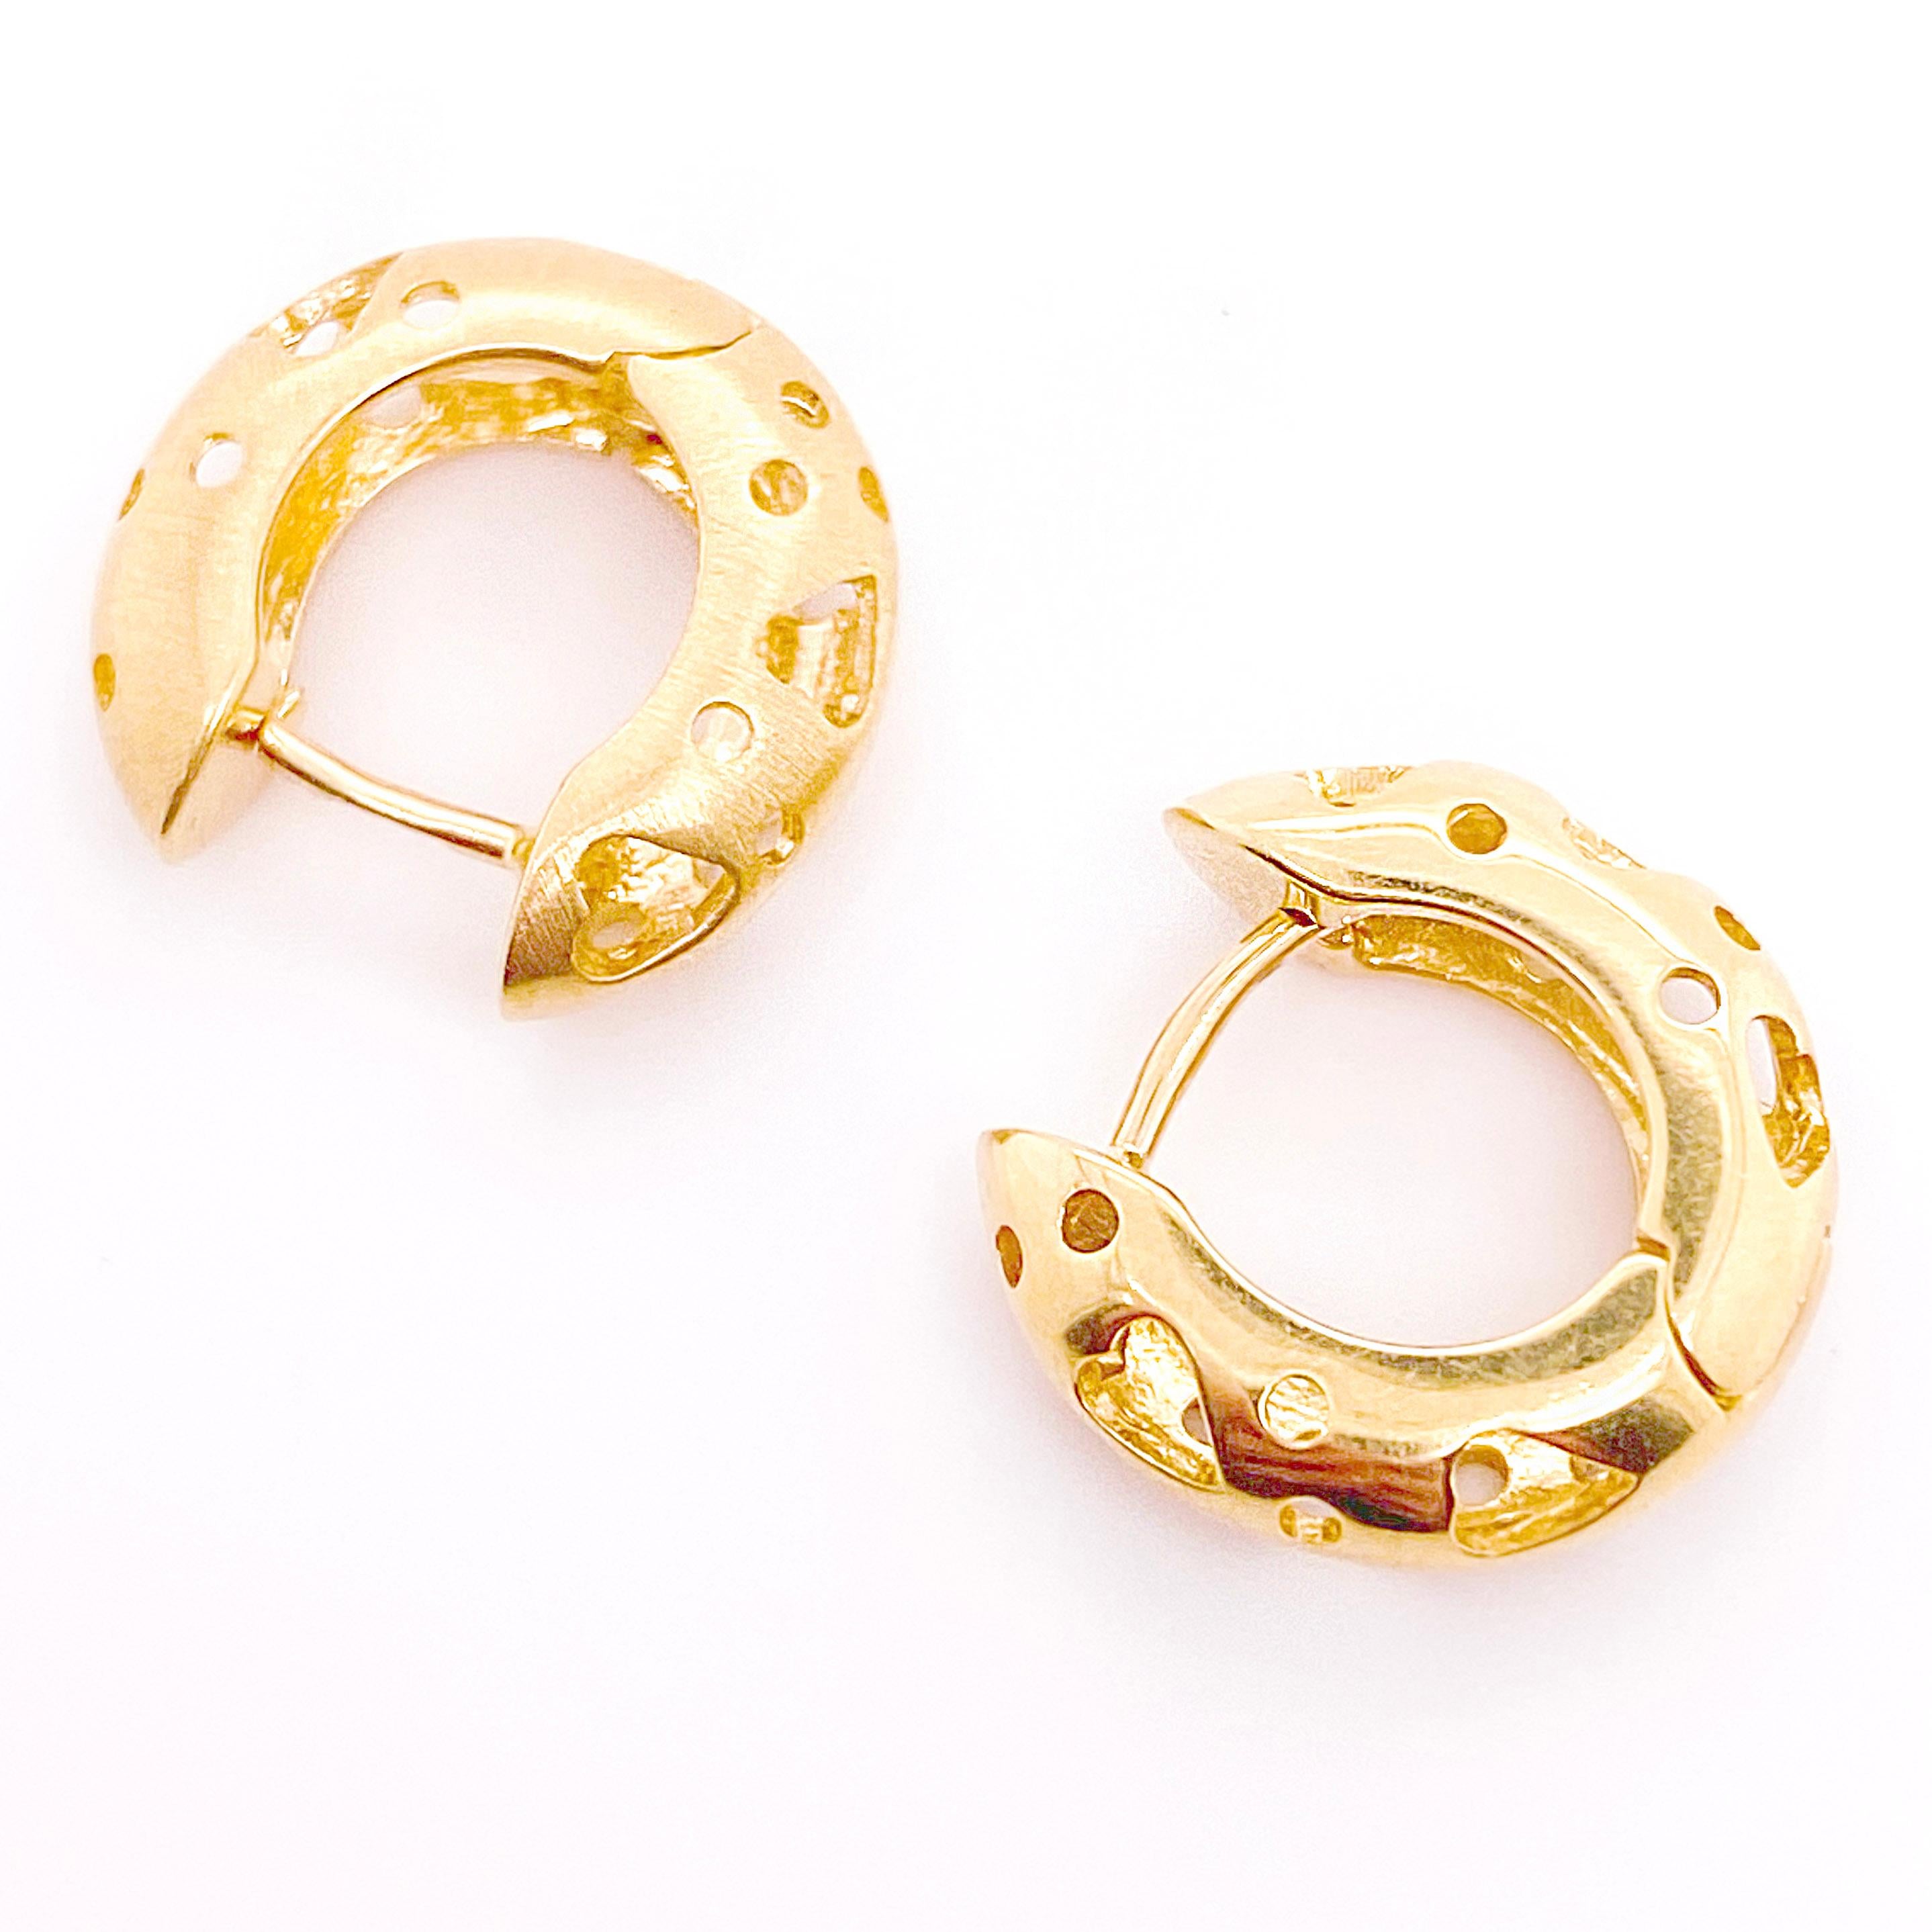 These 18 karat gold beauties hug the earlobe perfectly! Huggie earrings are the preferred style for the active woman as you 